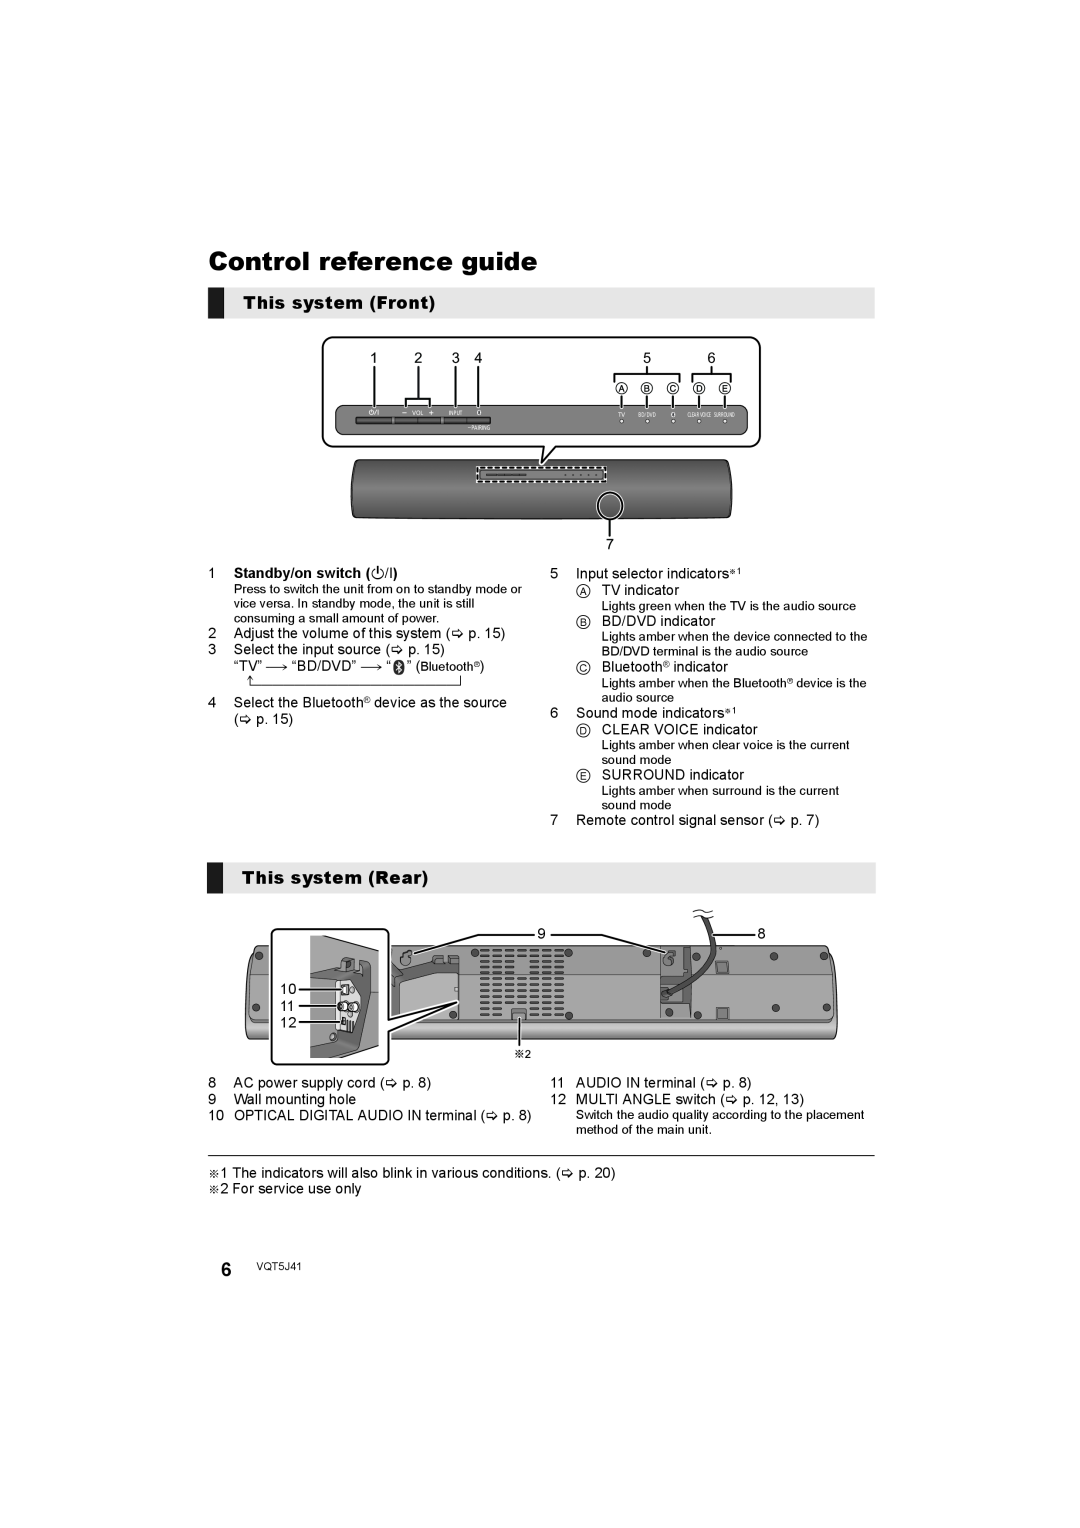 Panasonic SC-HTB8 owner manual Control reference guide, This system Front, This system Rear, Standby/on switch Í/I 